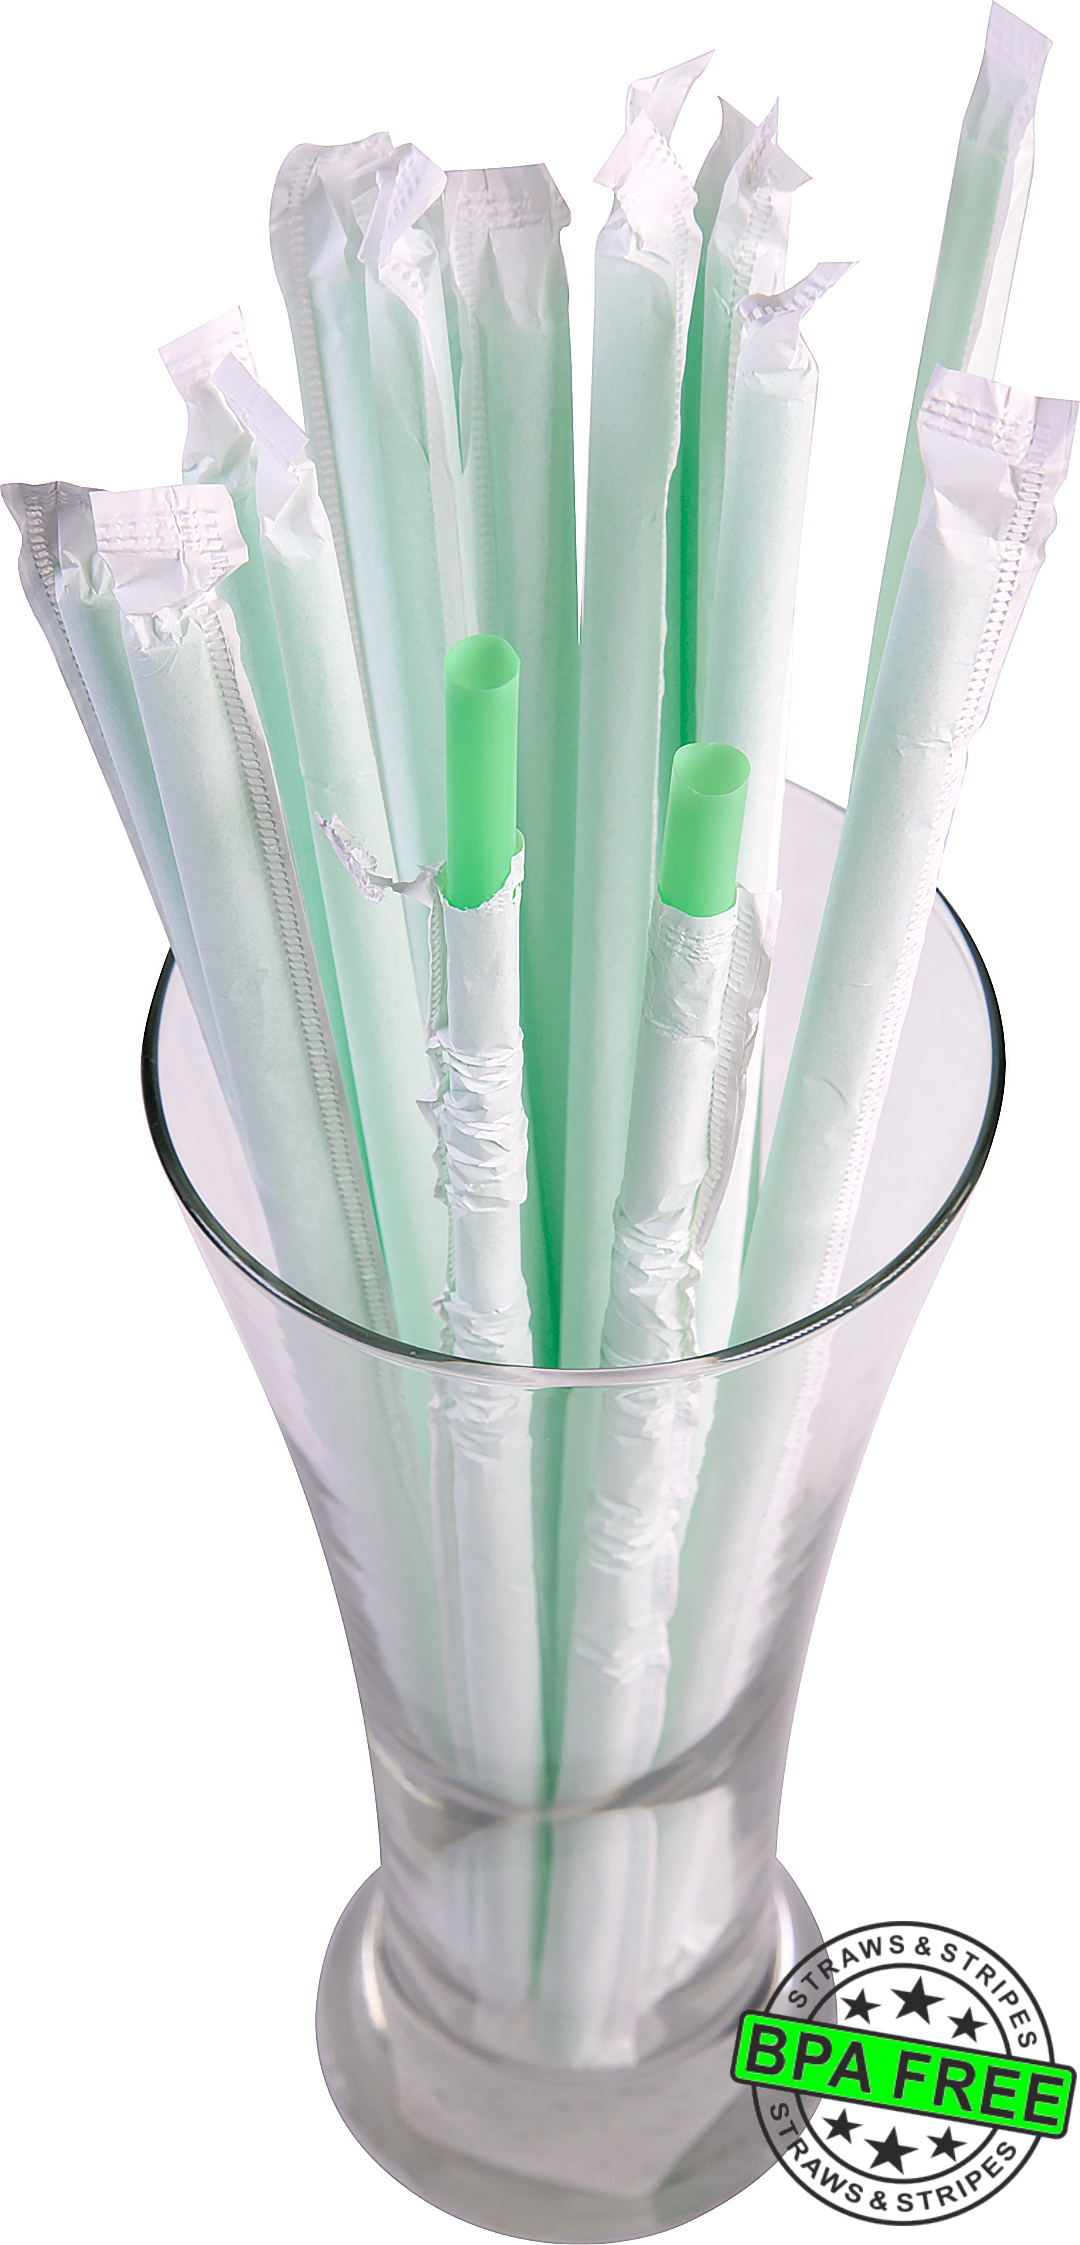 1 CASE - 2,500 (10x250) PAPER WRAPPED SMOOTHIE drinking straws 10 x 0.28 inch - color: mint